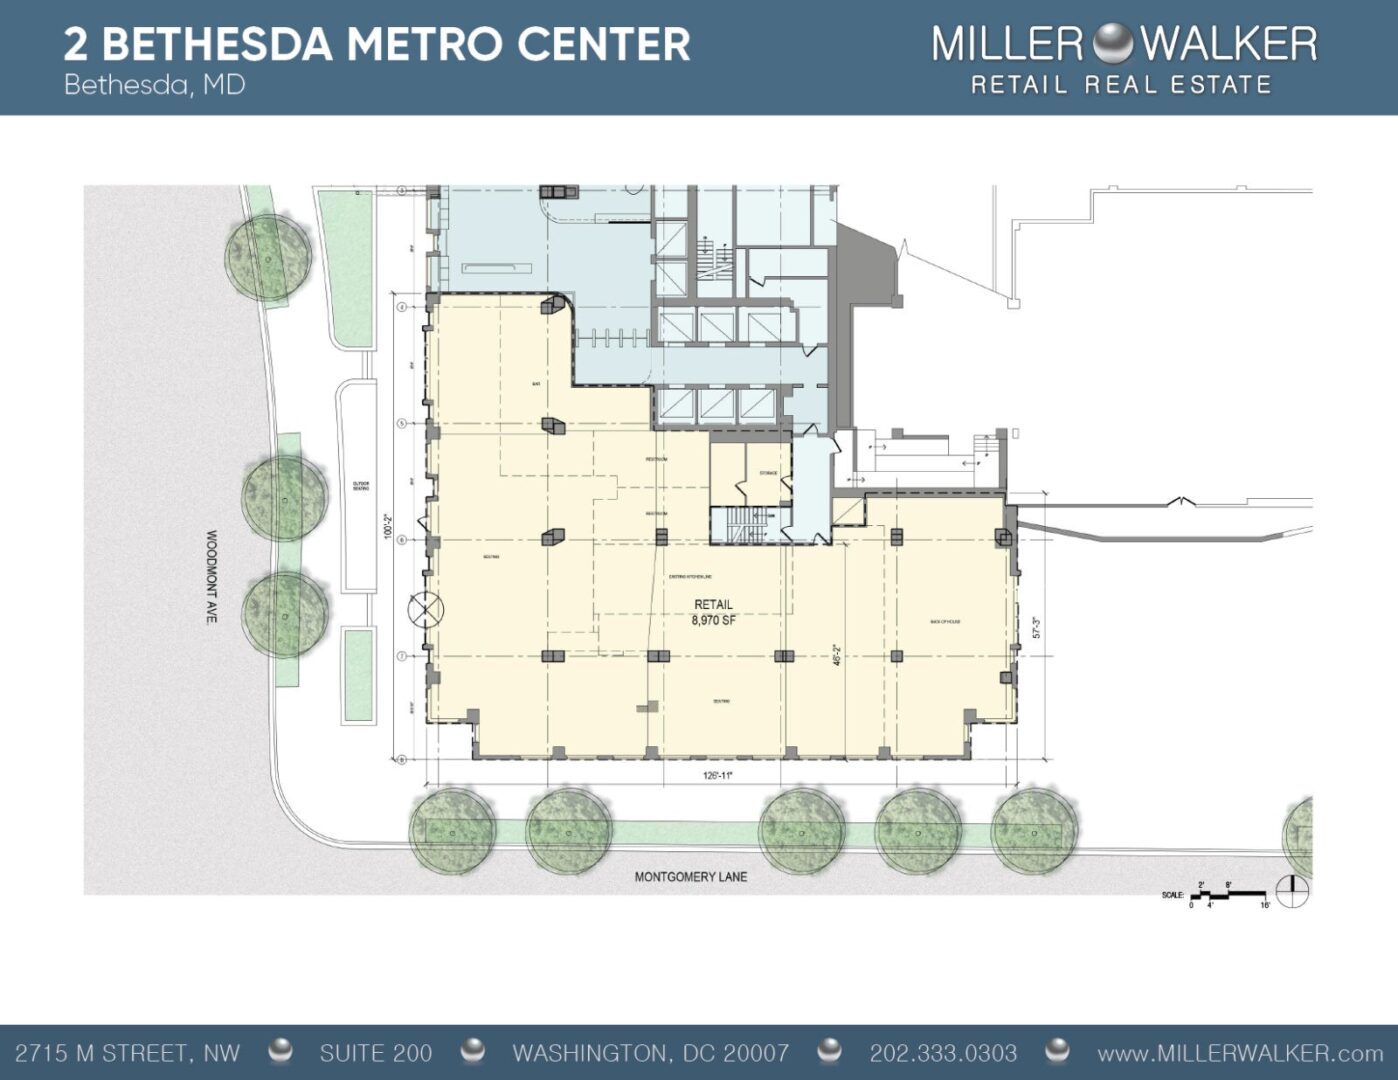 2 Bethesda maryland Retail space lease floor plans